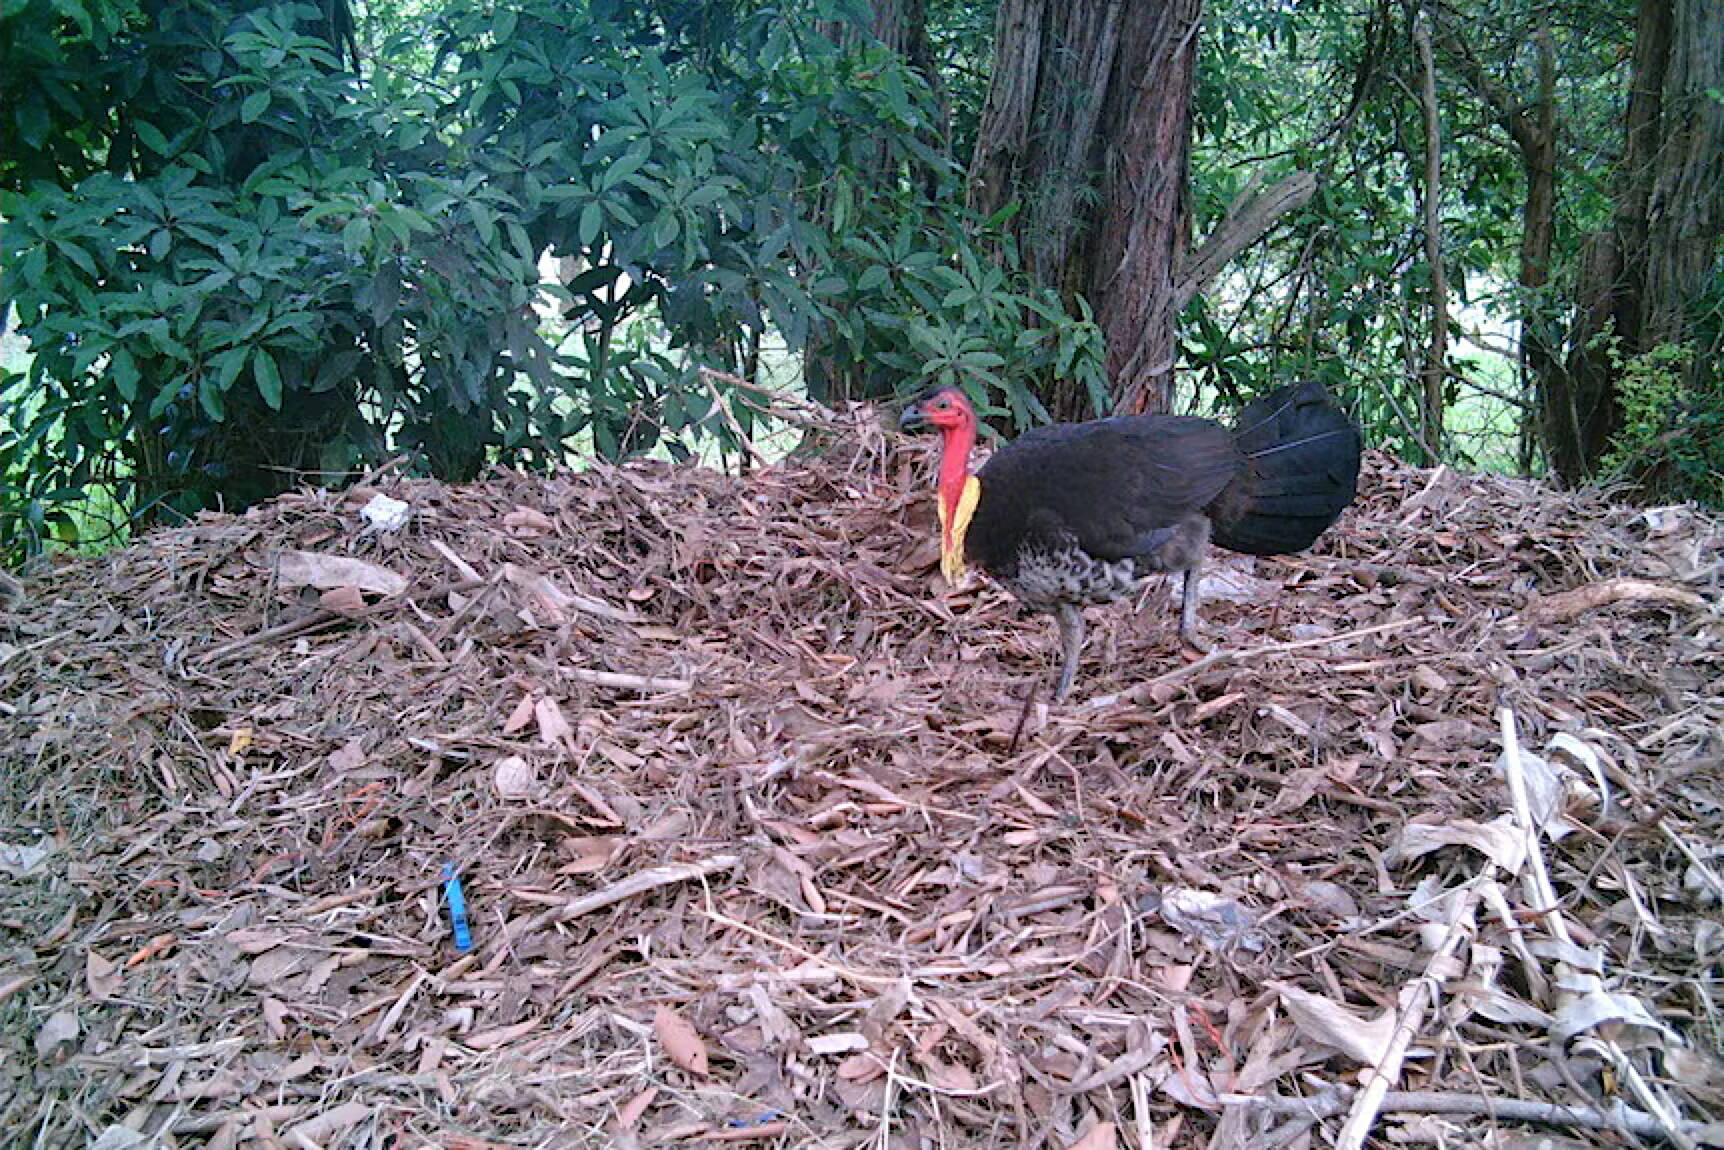 A brush turkey on a mound the size of a car (Flickr.com photo by Doug Beckers /CC-BY-SA-2.0)